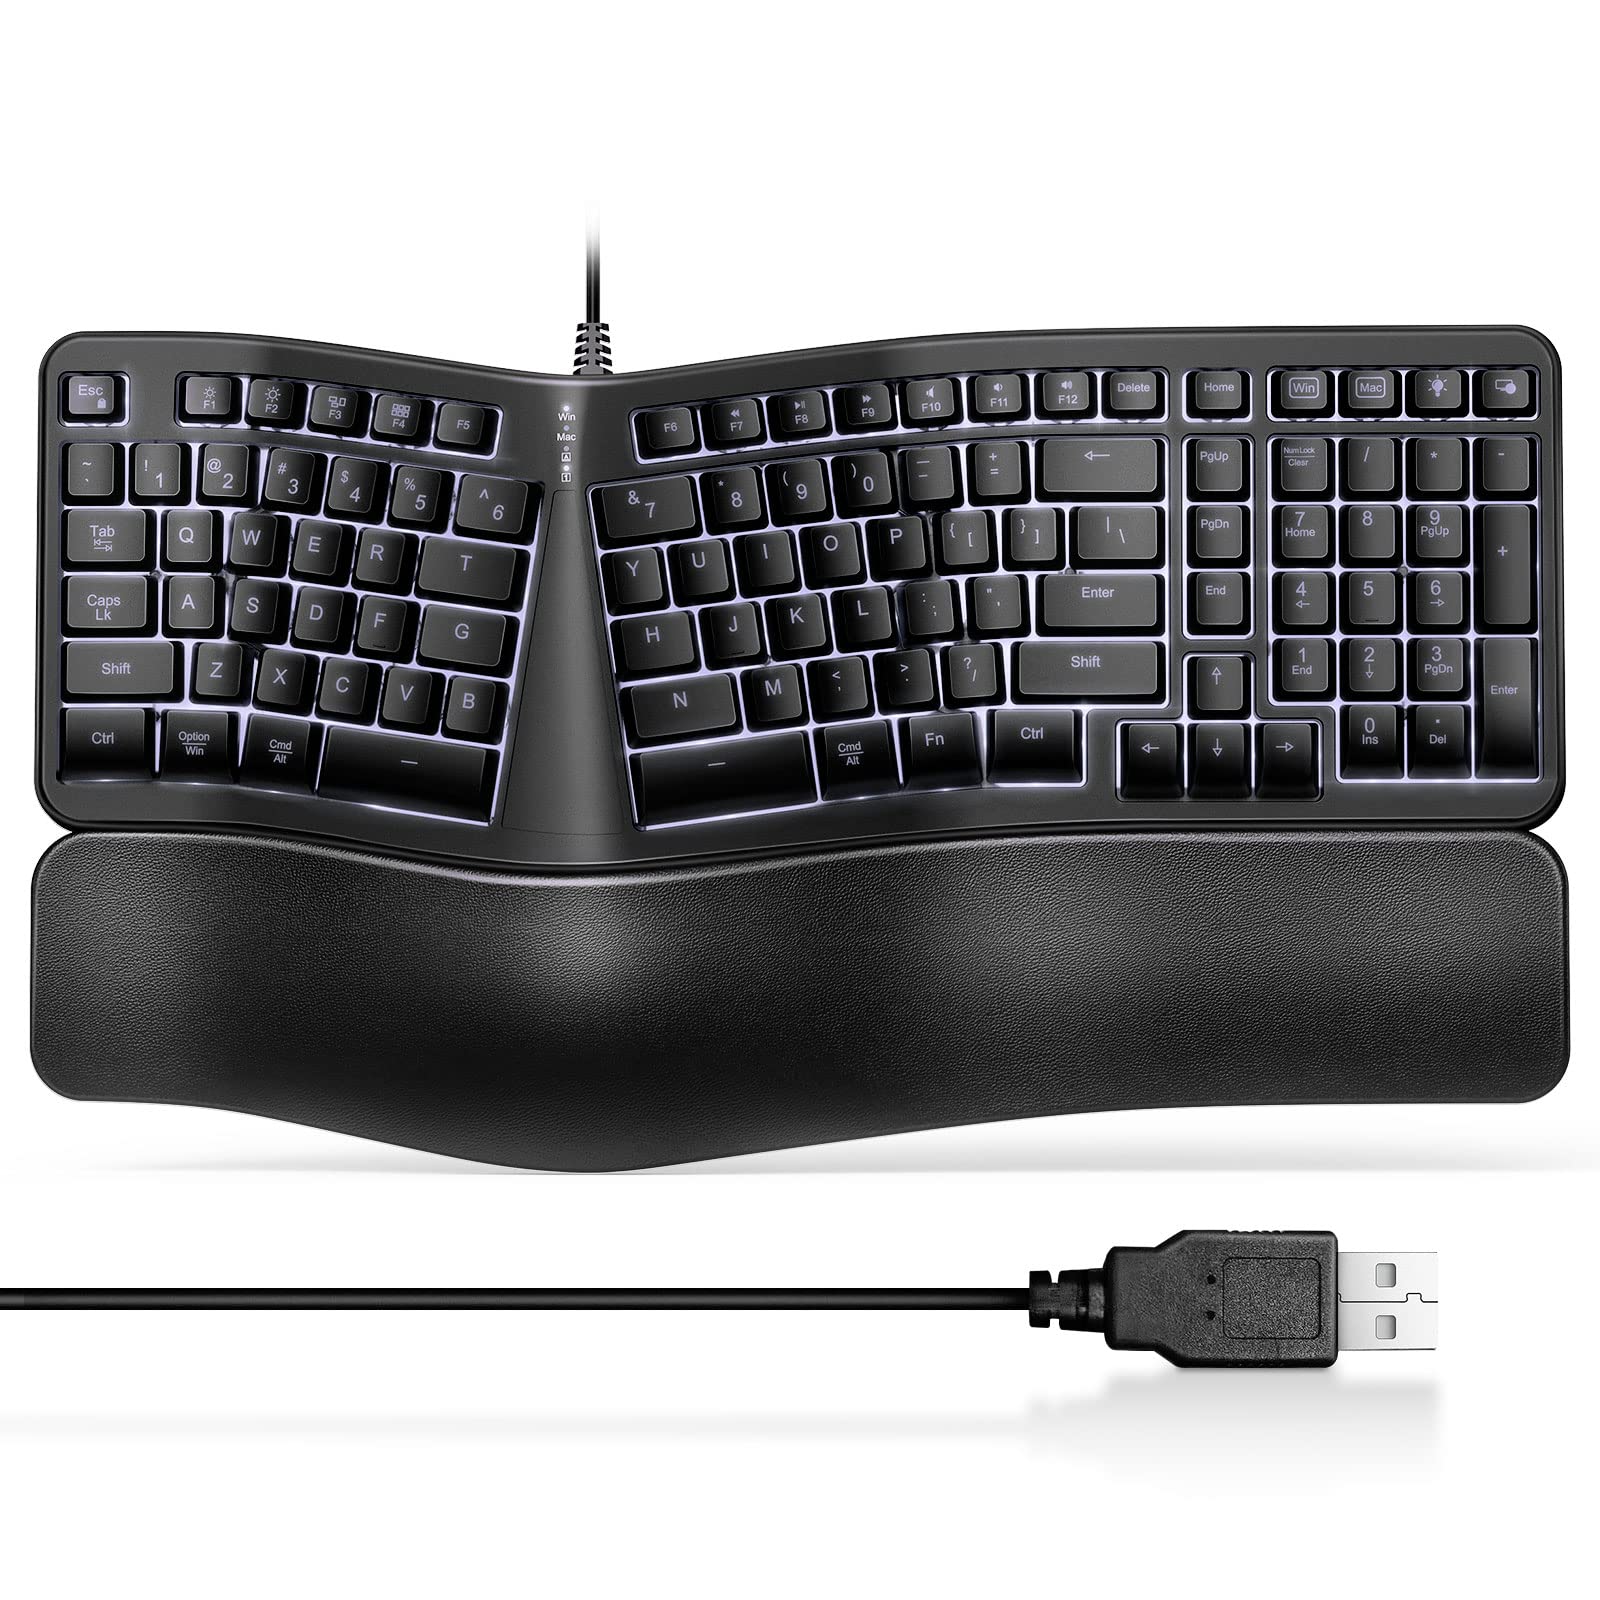 TANNSEN Backlit Wired Ergonomic Keyboard USB Split Keyboard with Wrist Rest and Comfortable Typing 104 Keys 10 Shortcuts fo